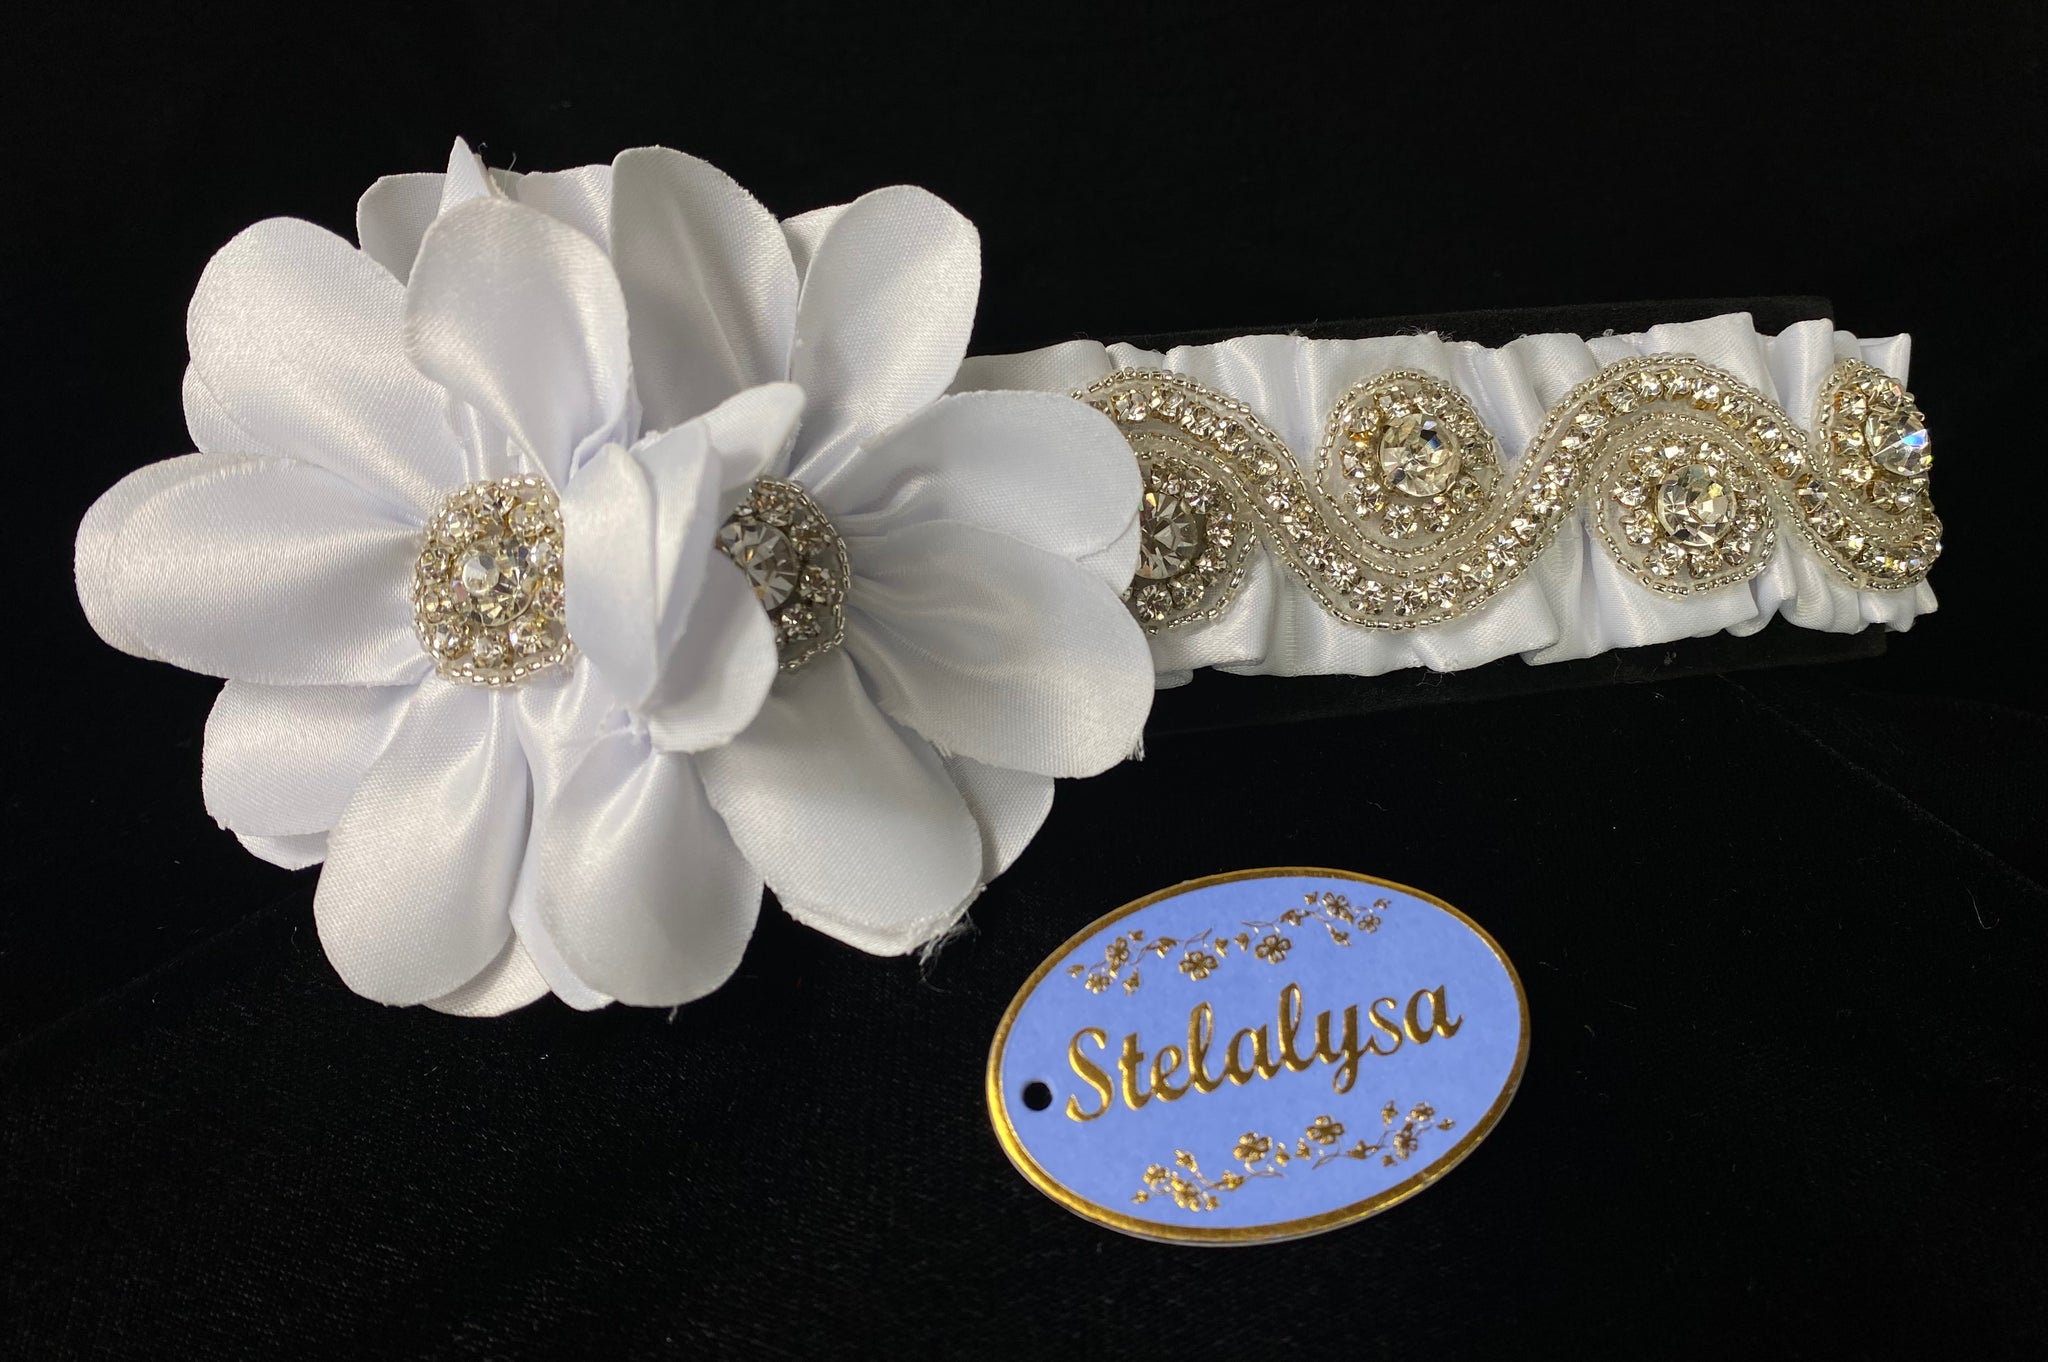 Baptism Headwrap  This is an elegant handmade and one-of-a-kind white headwrap with a two large satin flowers with an intricate rhinestone design.  Headwrap is made of soft satin elastic.  This headwrap can be worn with a white baptism dress/gown.  Your baby will look like the little princess she is with this headwrap on her special day!  